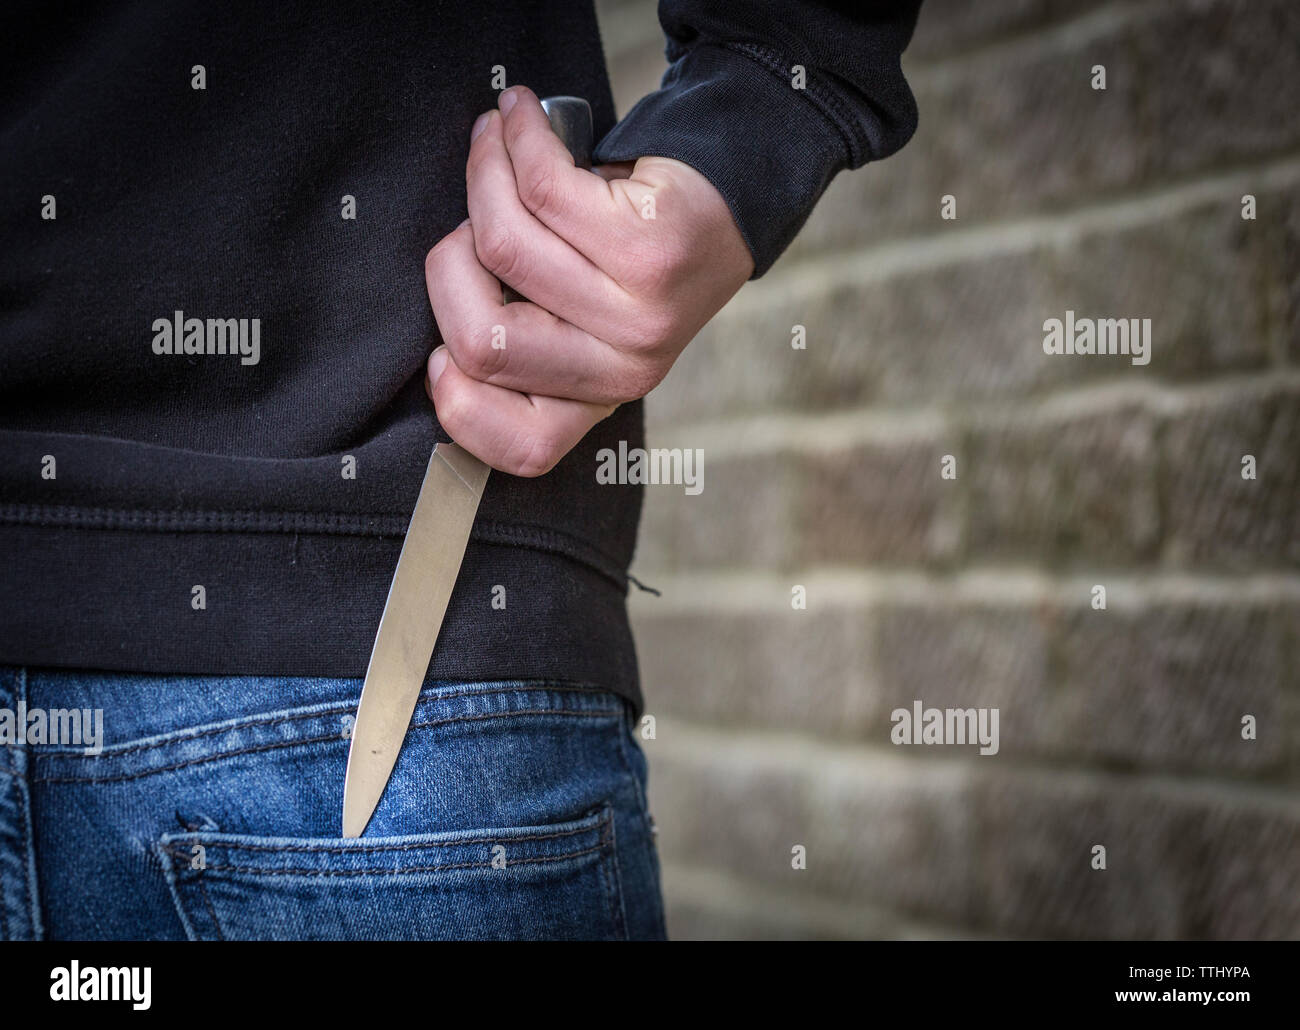 Knife Crime, Teenager in a hoody carrying a knife on the street in the UK Stock Photo